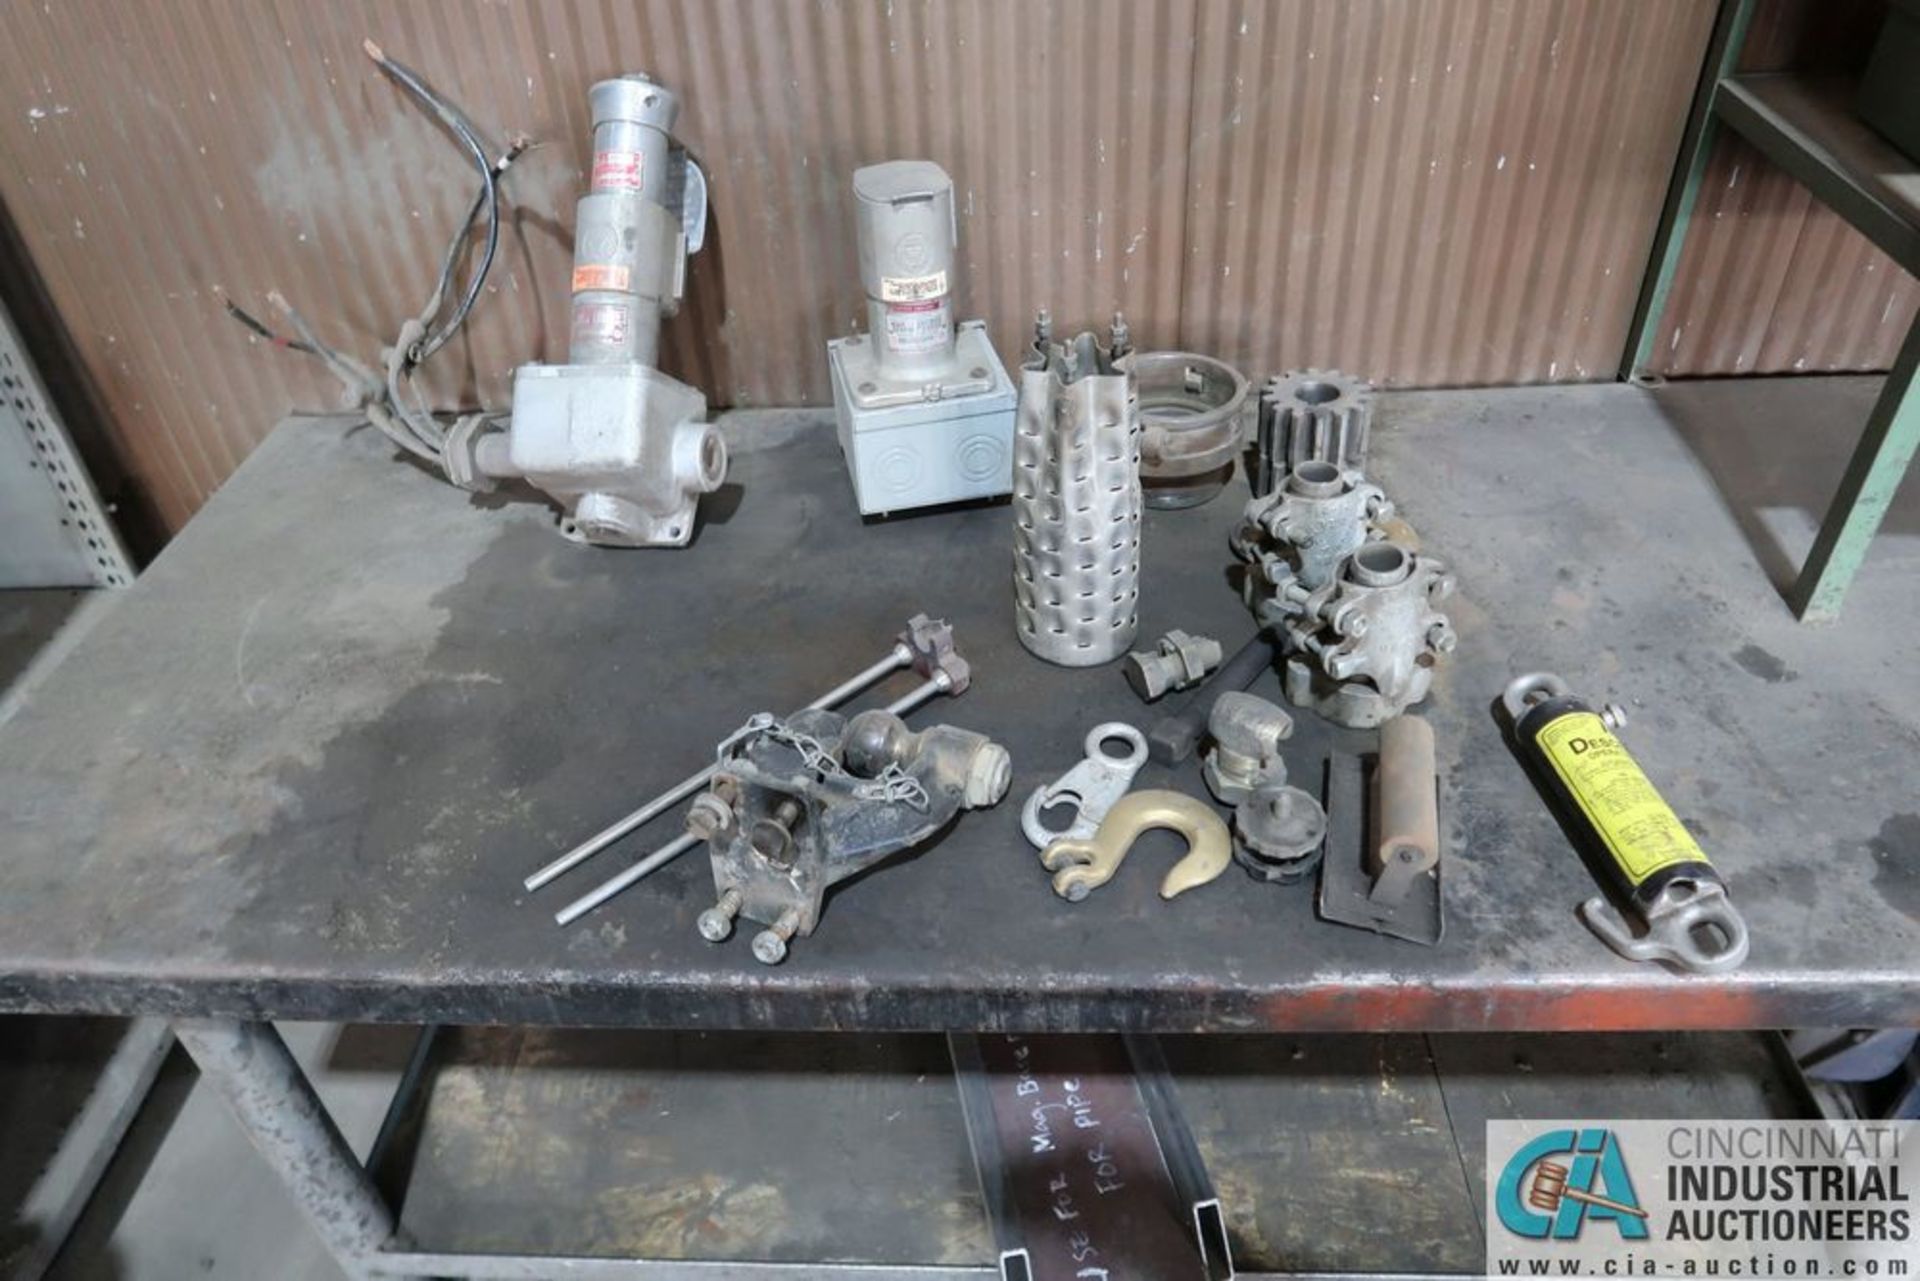 (LOT) CONTENTS OF CRIB INCLUDING ELECTRICAL FITTINGS, CONNECTIONS, MOTORS, BENCHES - Image 10 of 14